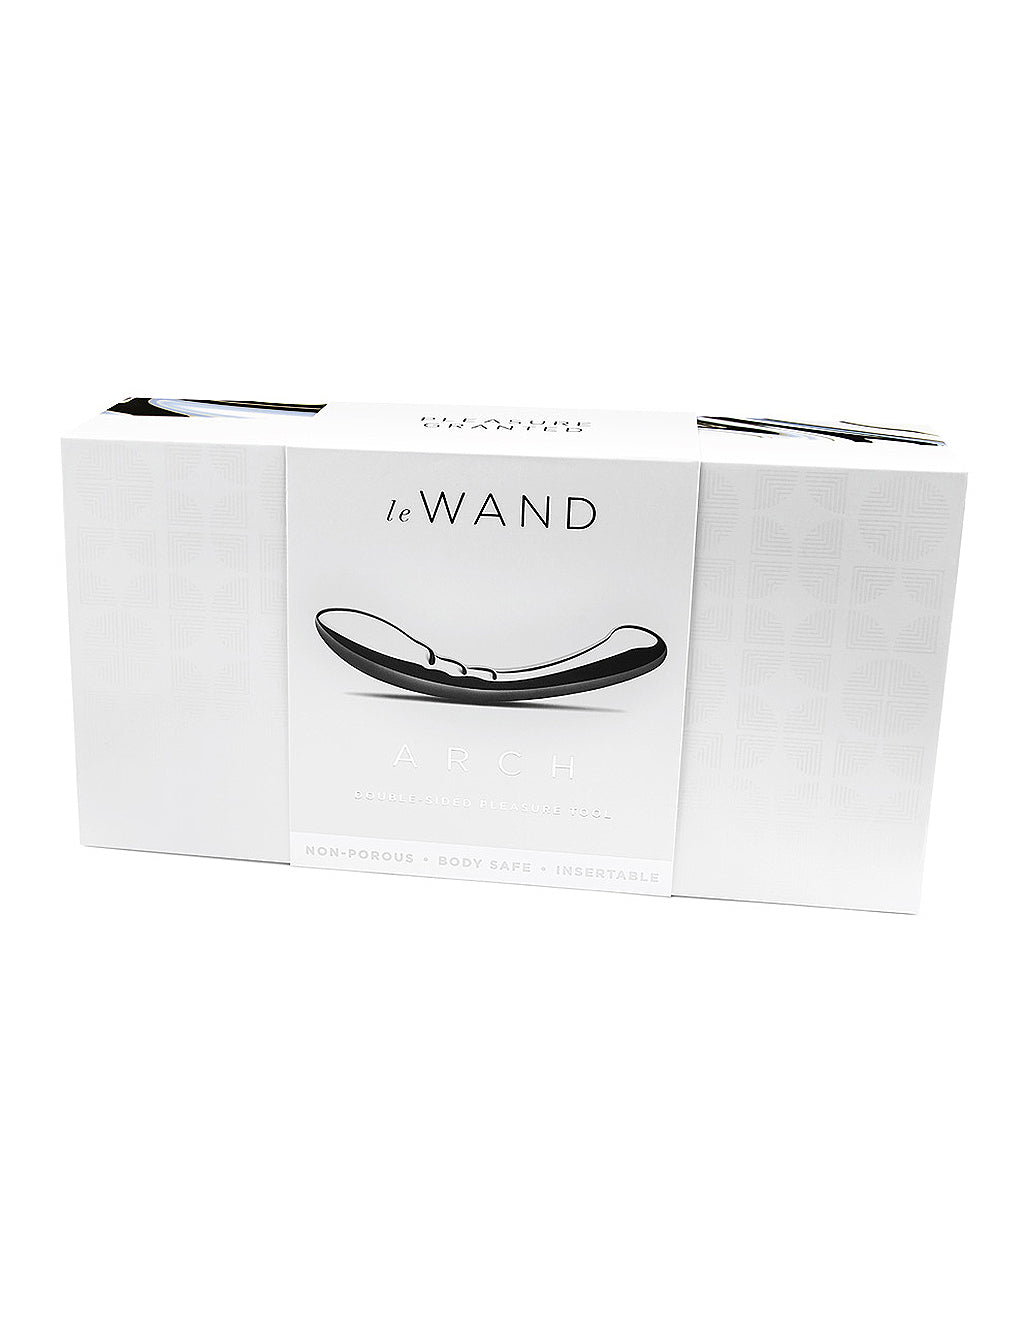 Le Wand Arch Stainless Steel Wand- front box